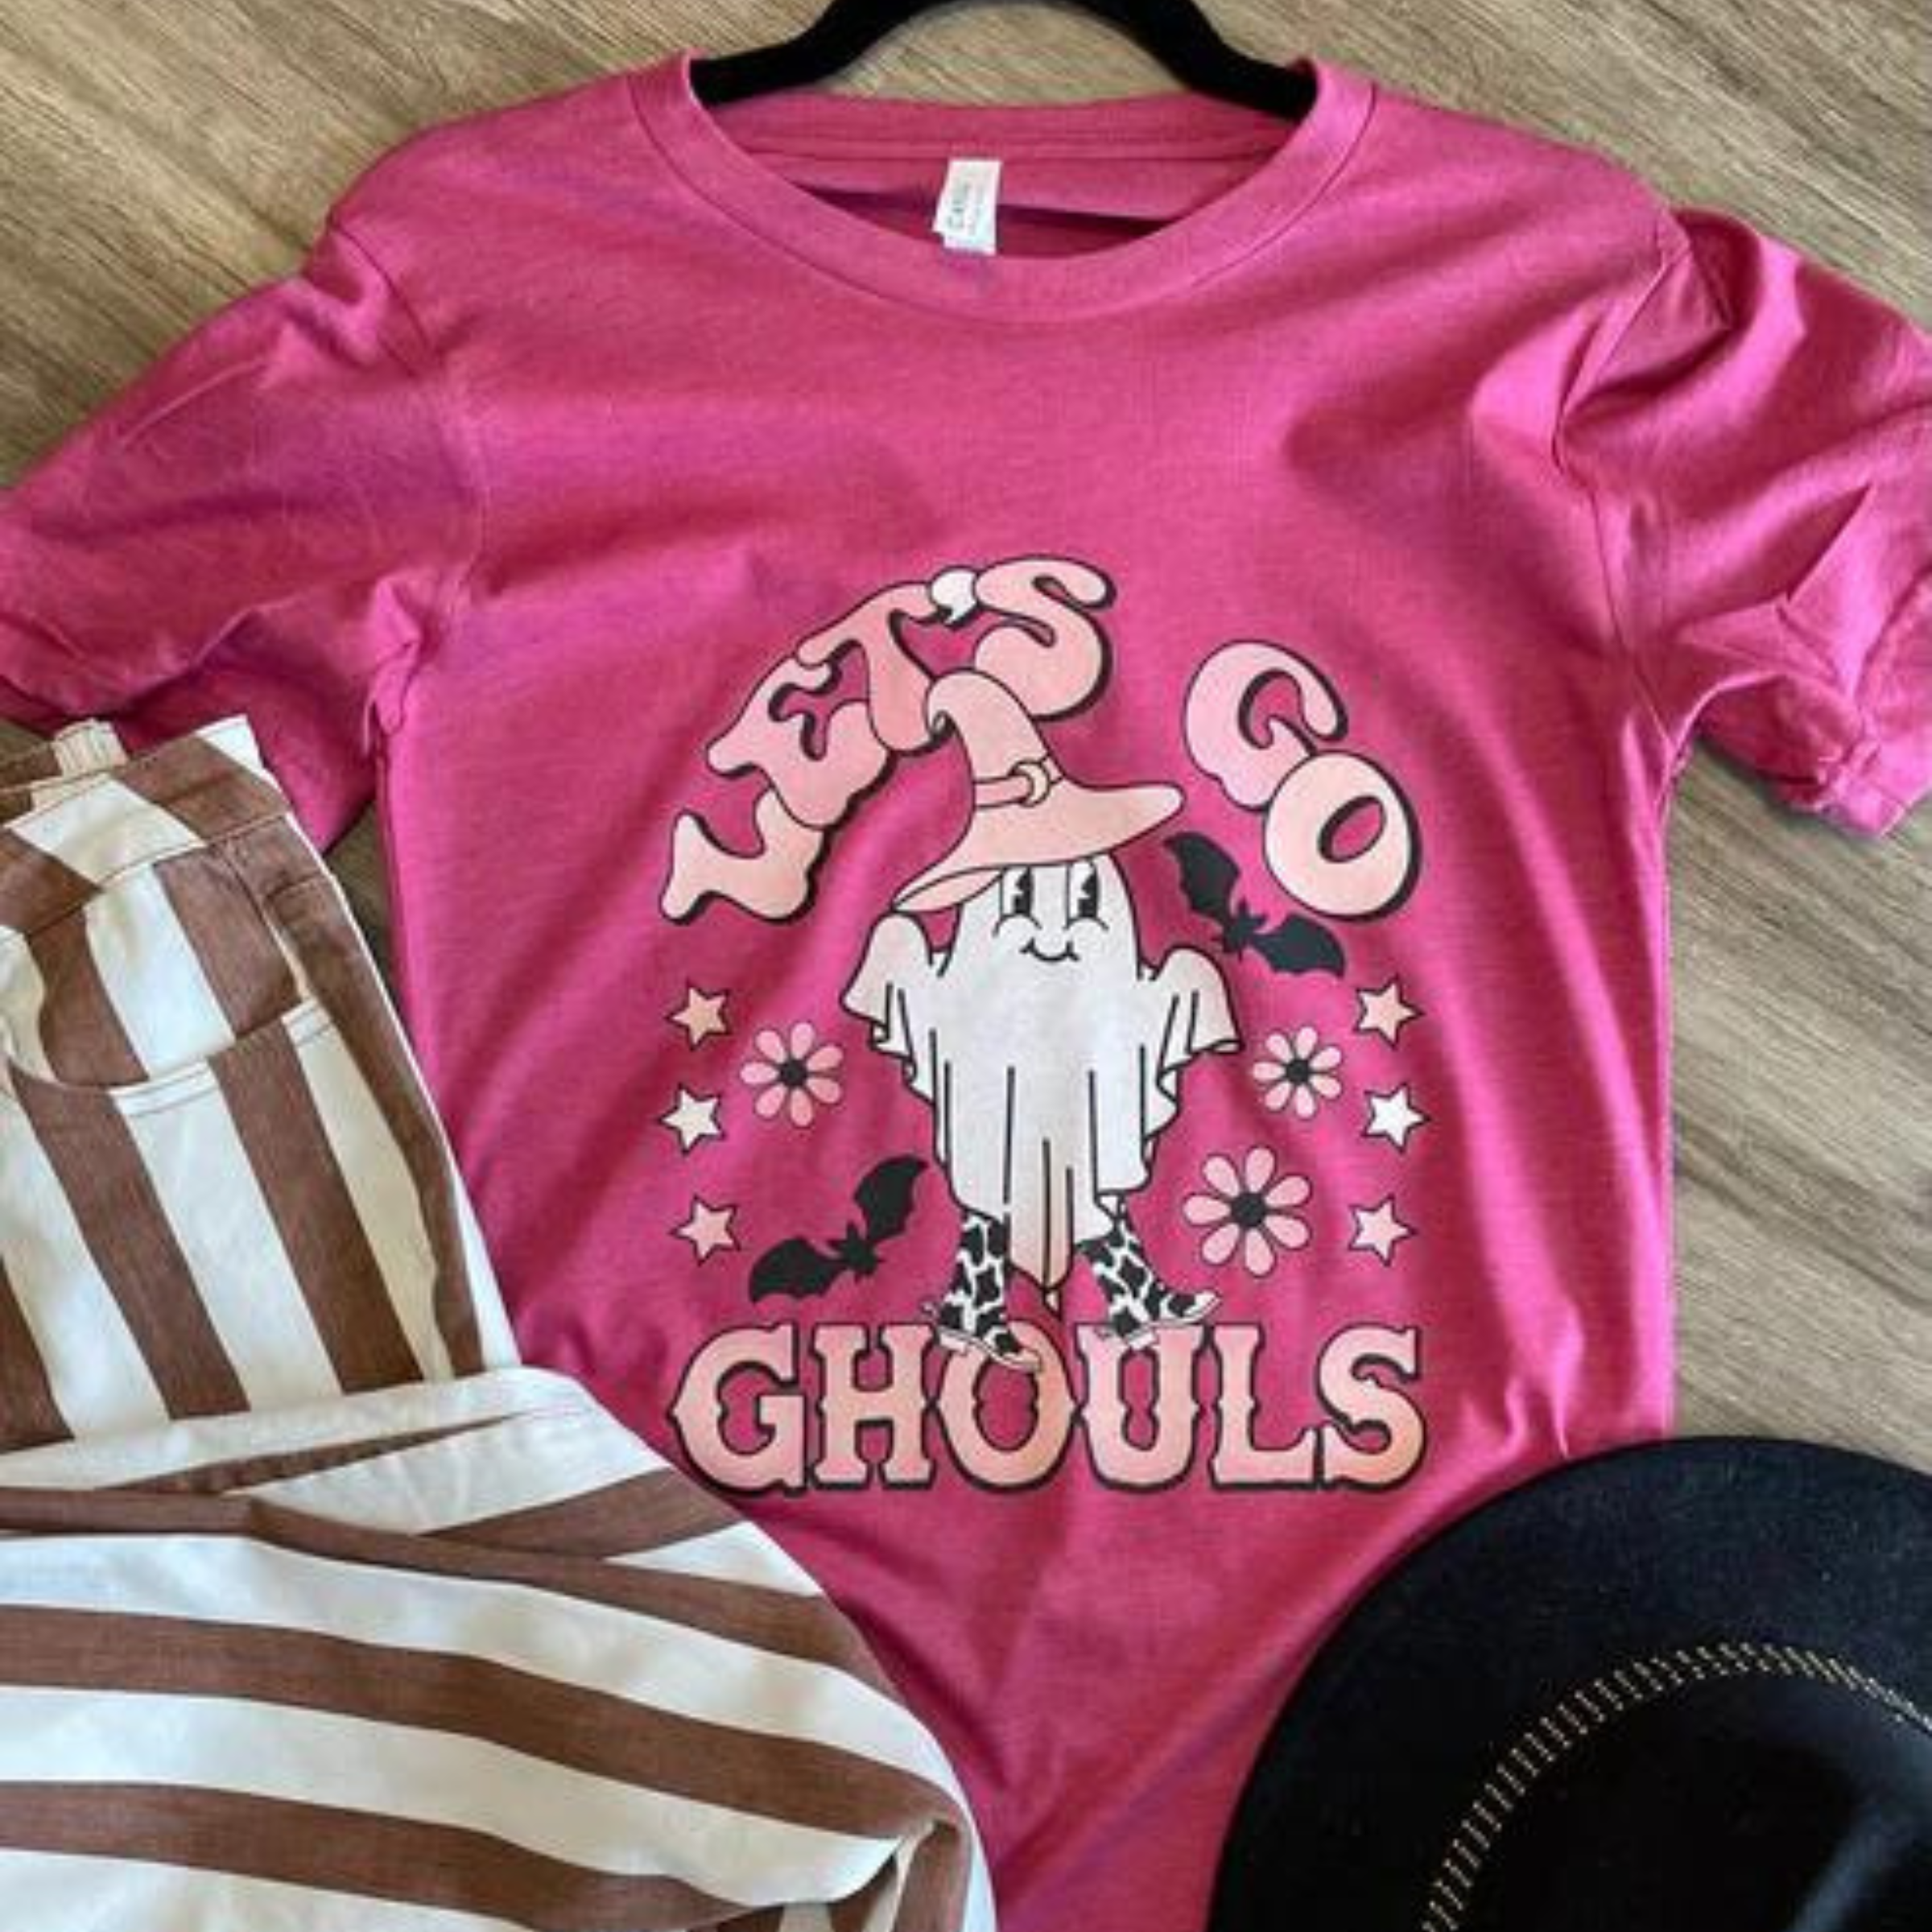 This pink Bella + Canvas tee includes a crew neckline, short sleeves, and a hand drawn graphic of a white ghost with a pink witch hat and cow print boots. The words "Let's Go Ghouls" are around the ghost along with two black bats, white and light pink stars, and three flowers in pink with black centers. "Let's Go Ghouls" is in a pretty, light pink. This is shown paired with a pair of brown and white vertical striped jeans and a black felt hat. 